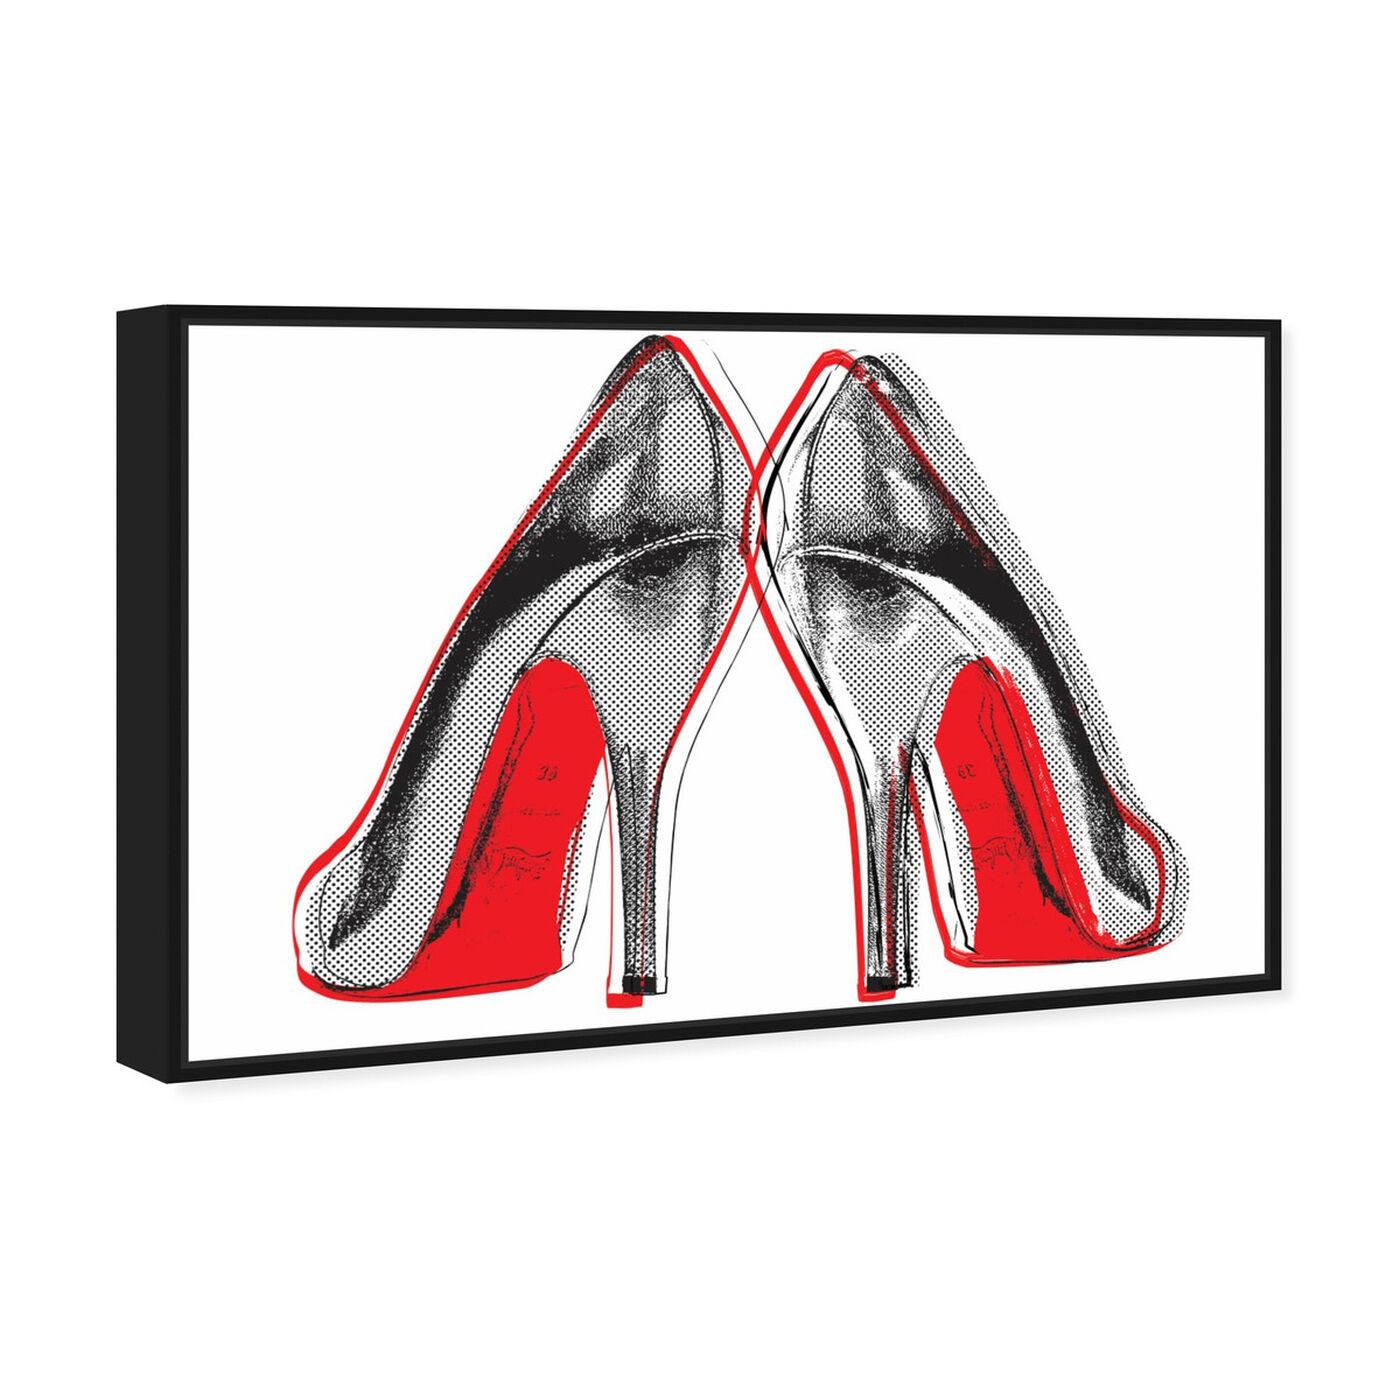 Angled view of Fire In Your New Shoes featuring fashion and glam and shoes art.